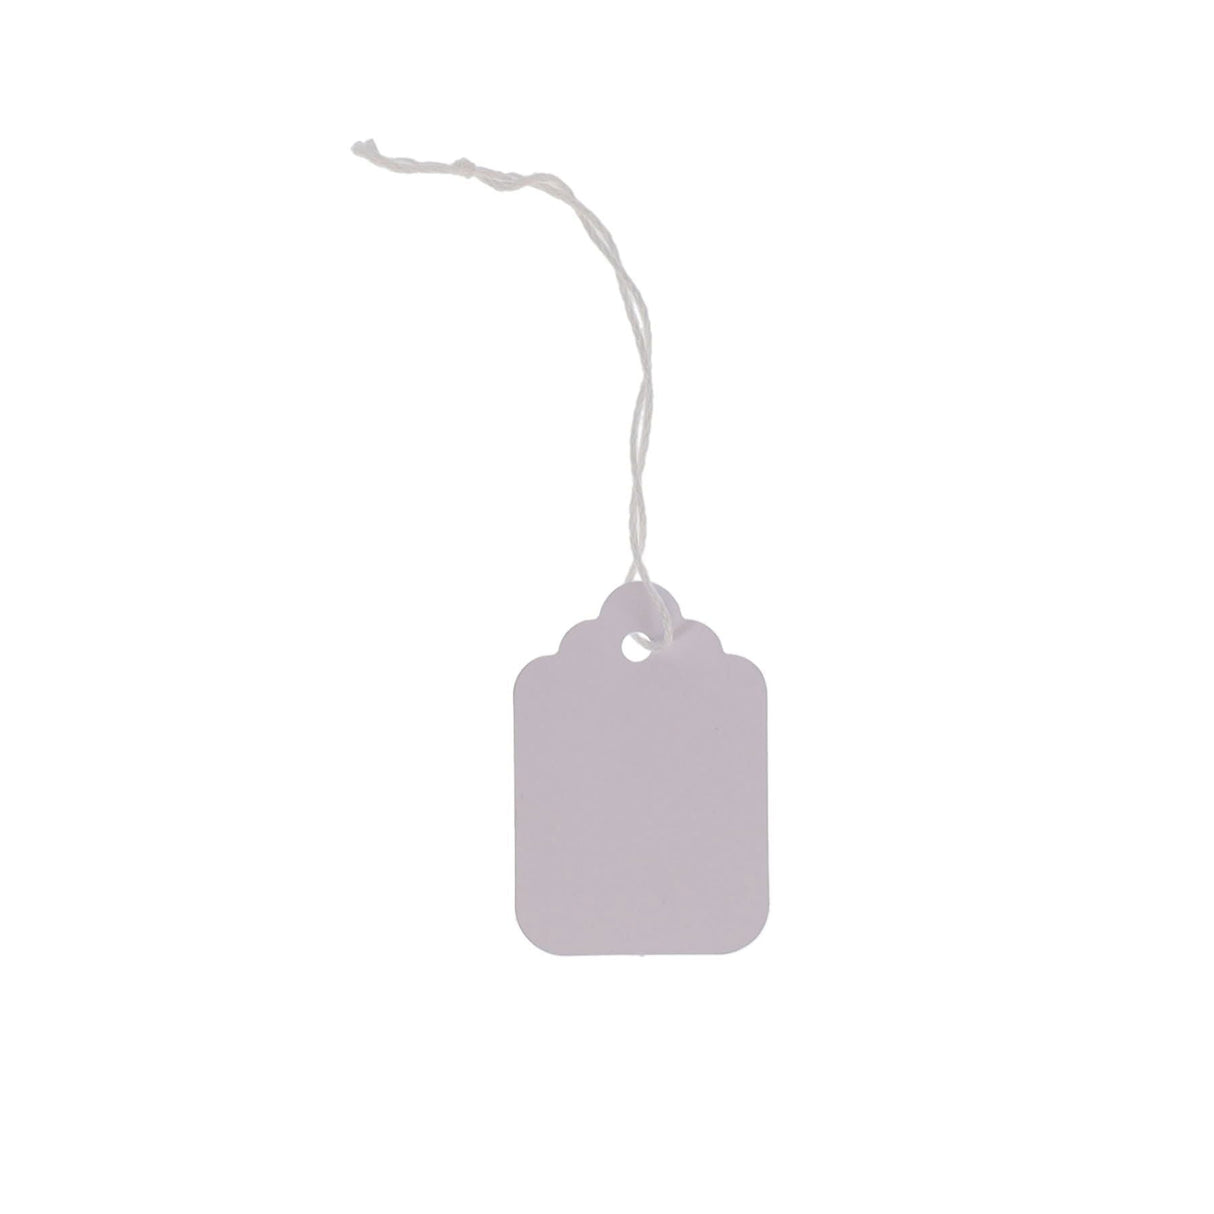 Premier Office 36mm x 53mm Strung Tags - Pack of 100 | Stationery Shop UK